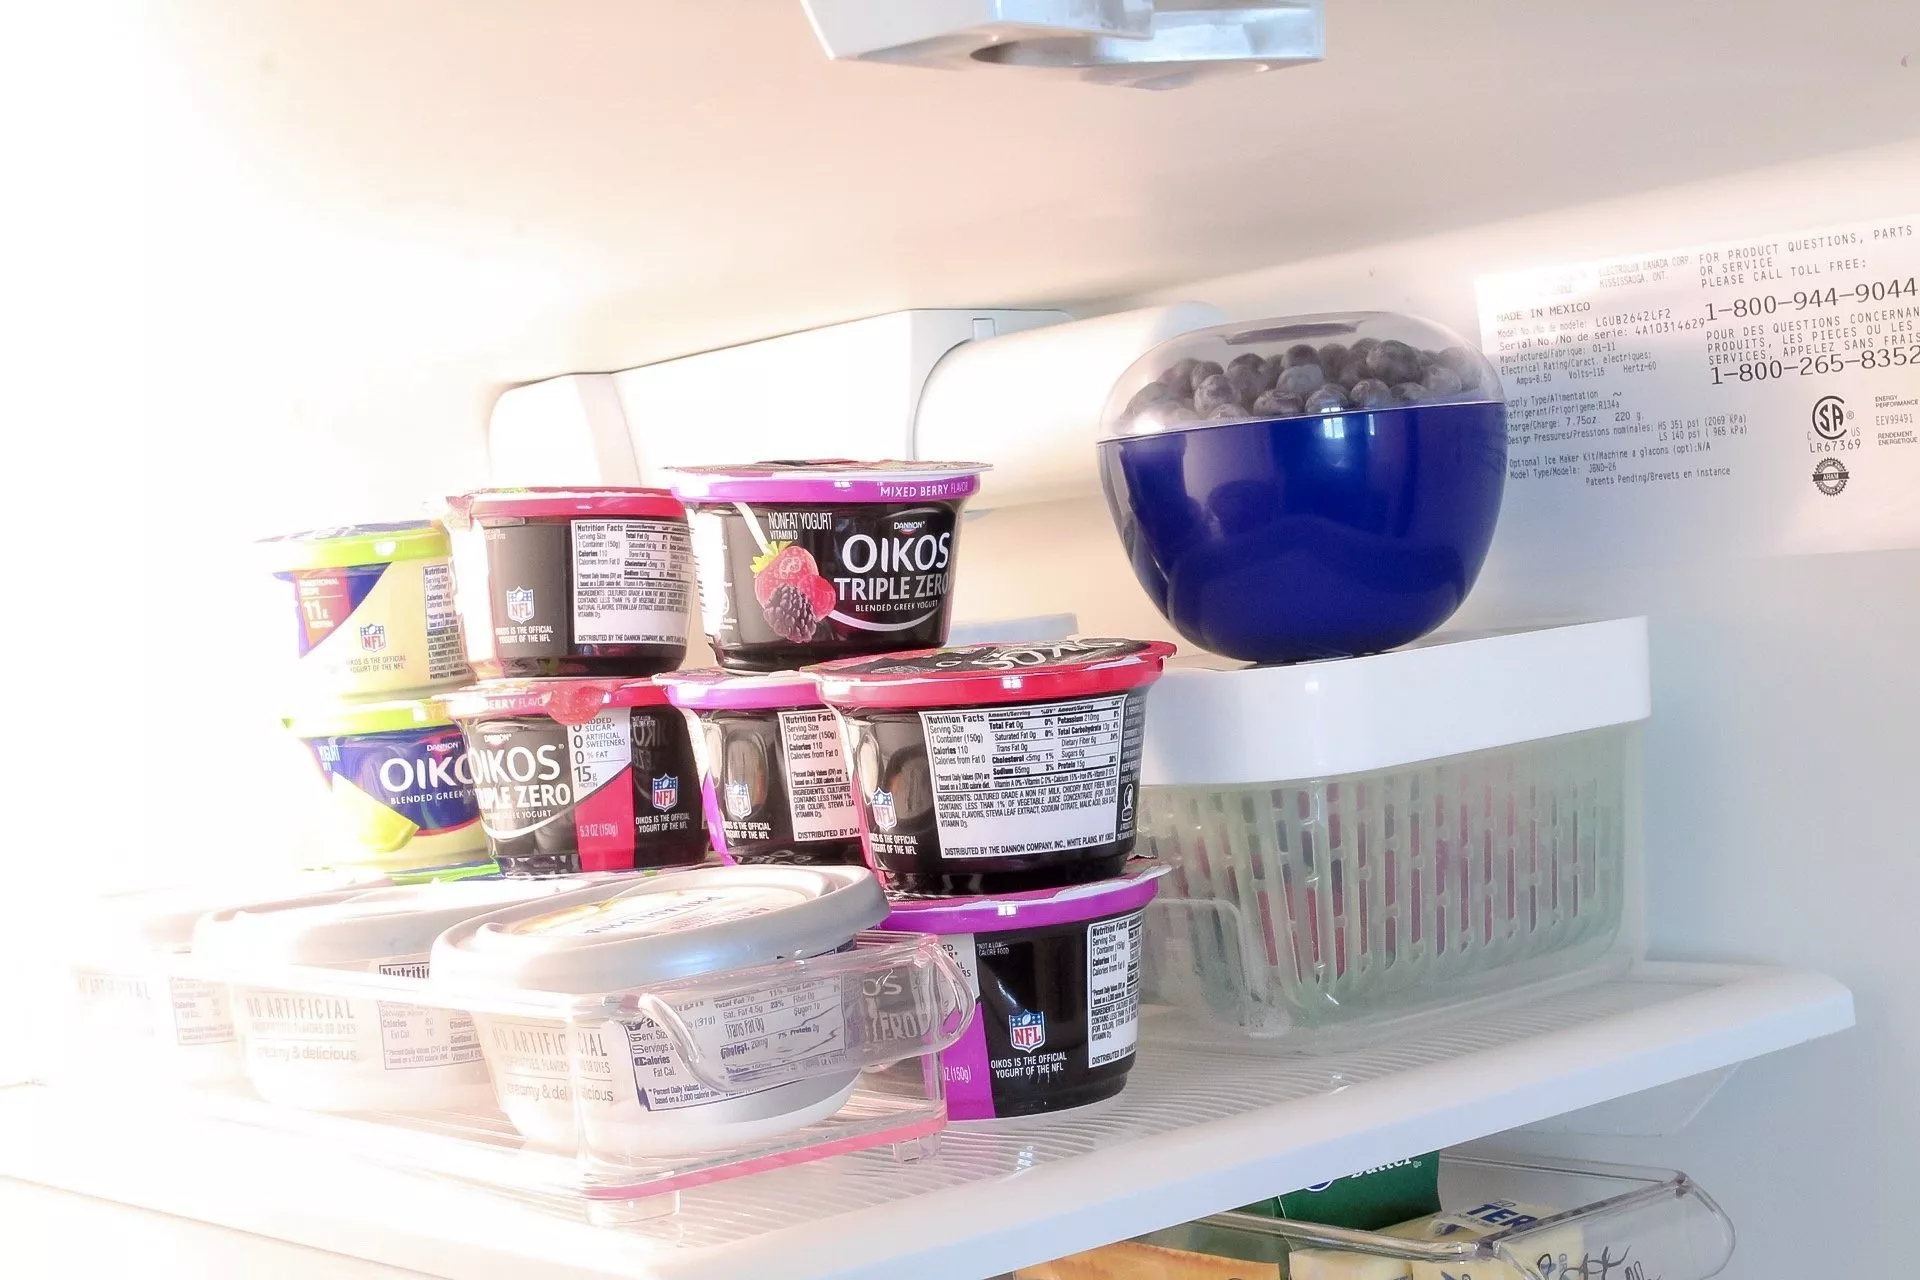 Our organized top shelf where we put out blueberries, yogurt, and cream cheese!